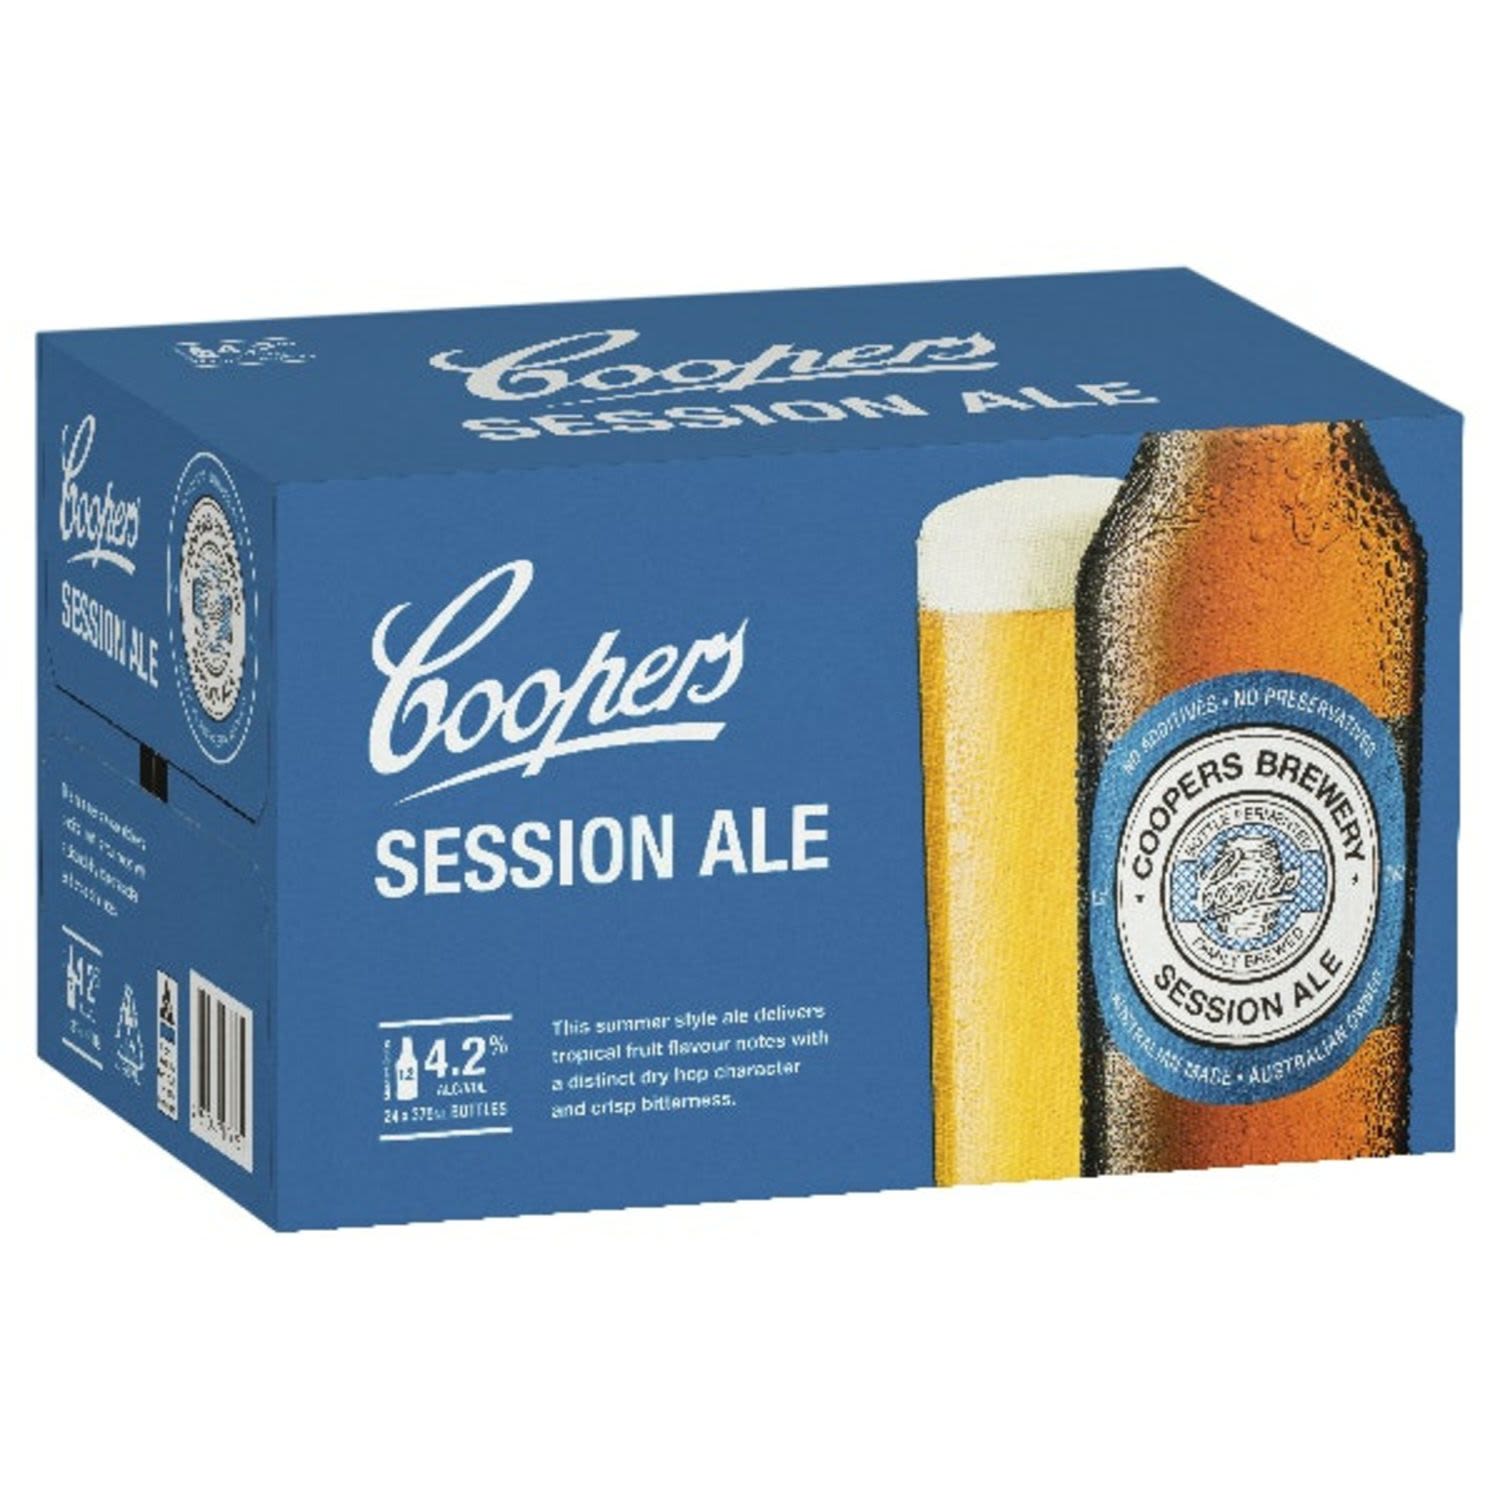 Coopers Session Ale Bottle Case 375mL 24 Pack